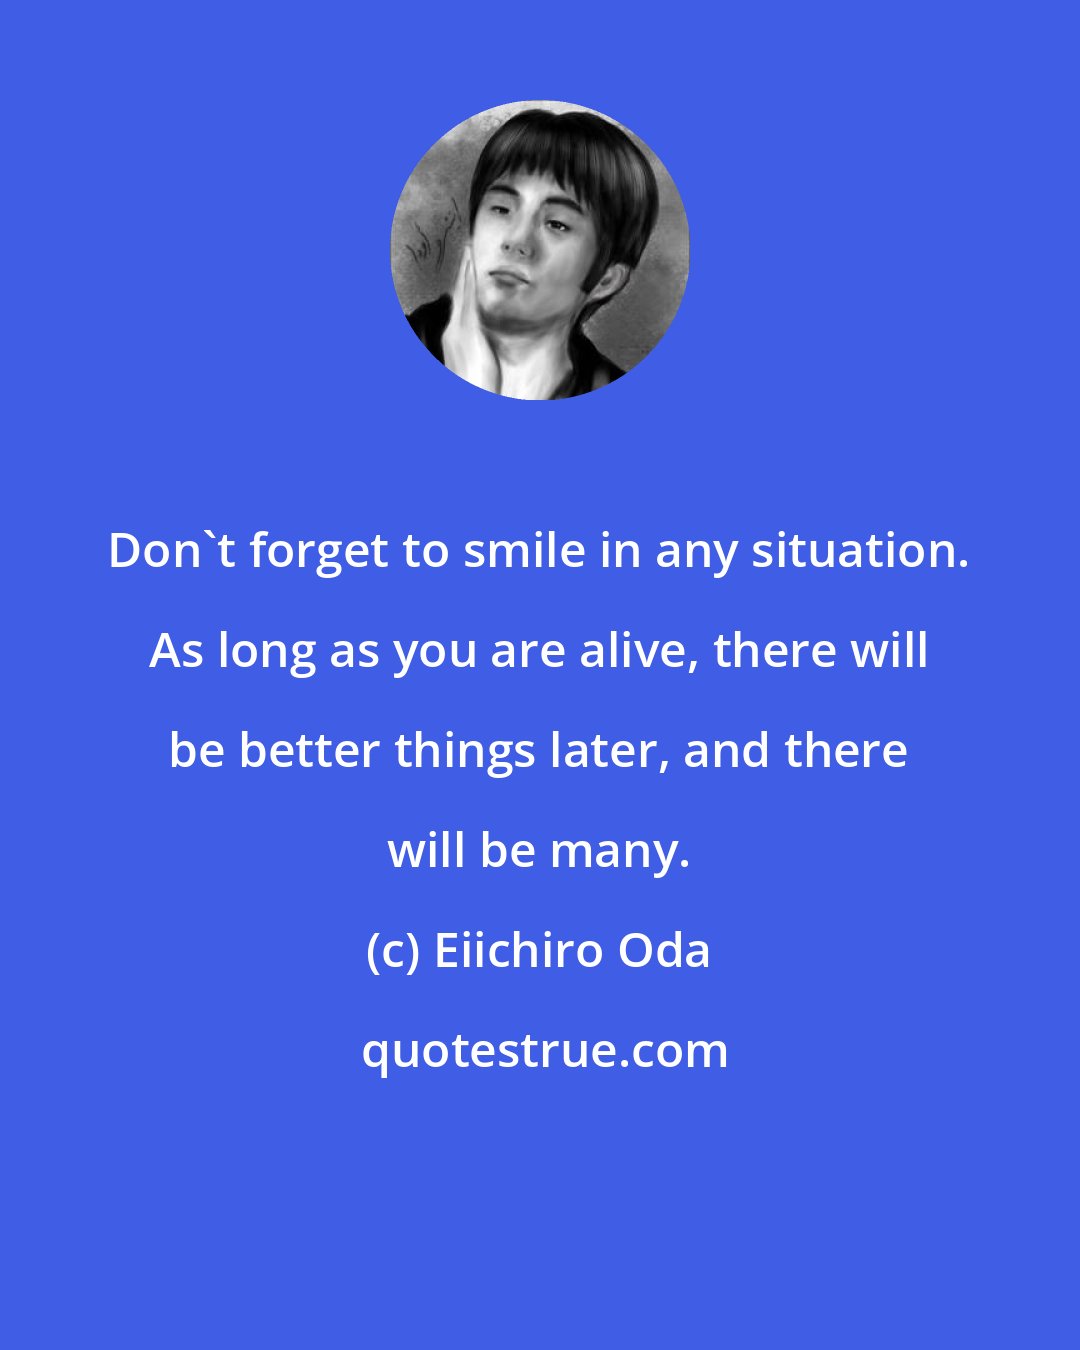 Eiichiro Oda: Don't forget to smile in any situation. As long as you are alive, there will be better things later, and there will be many.